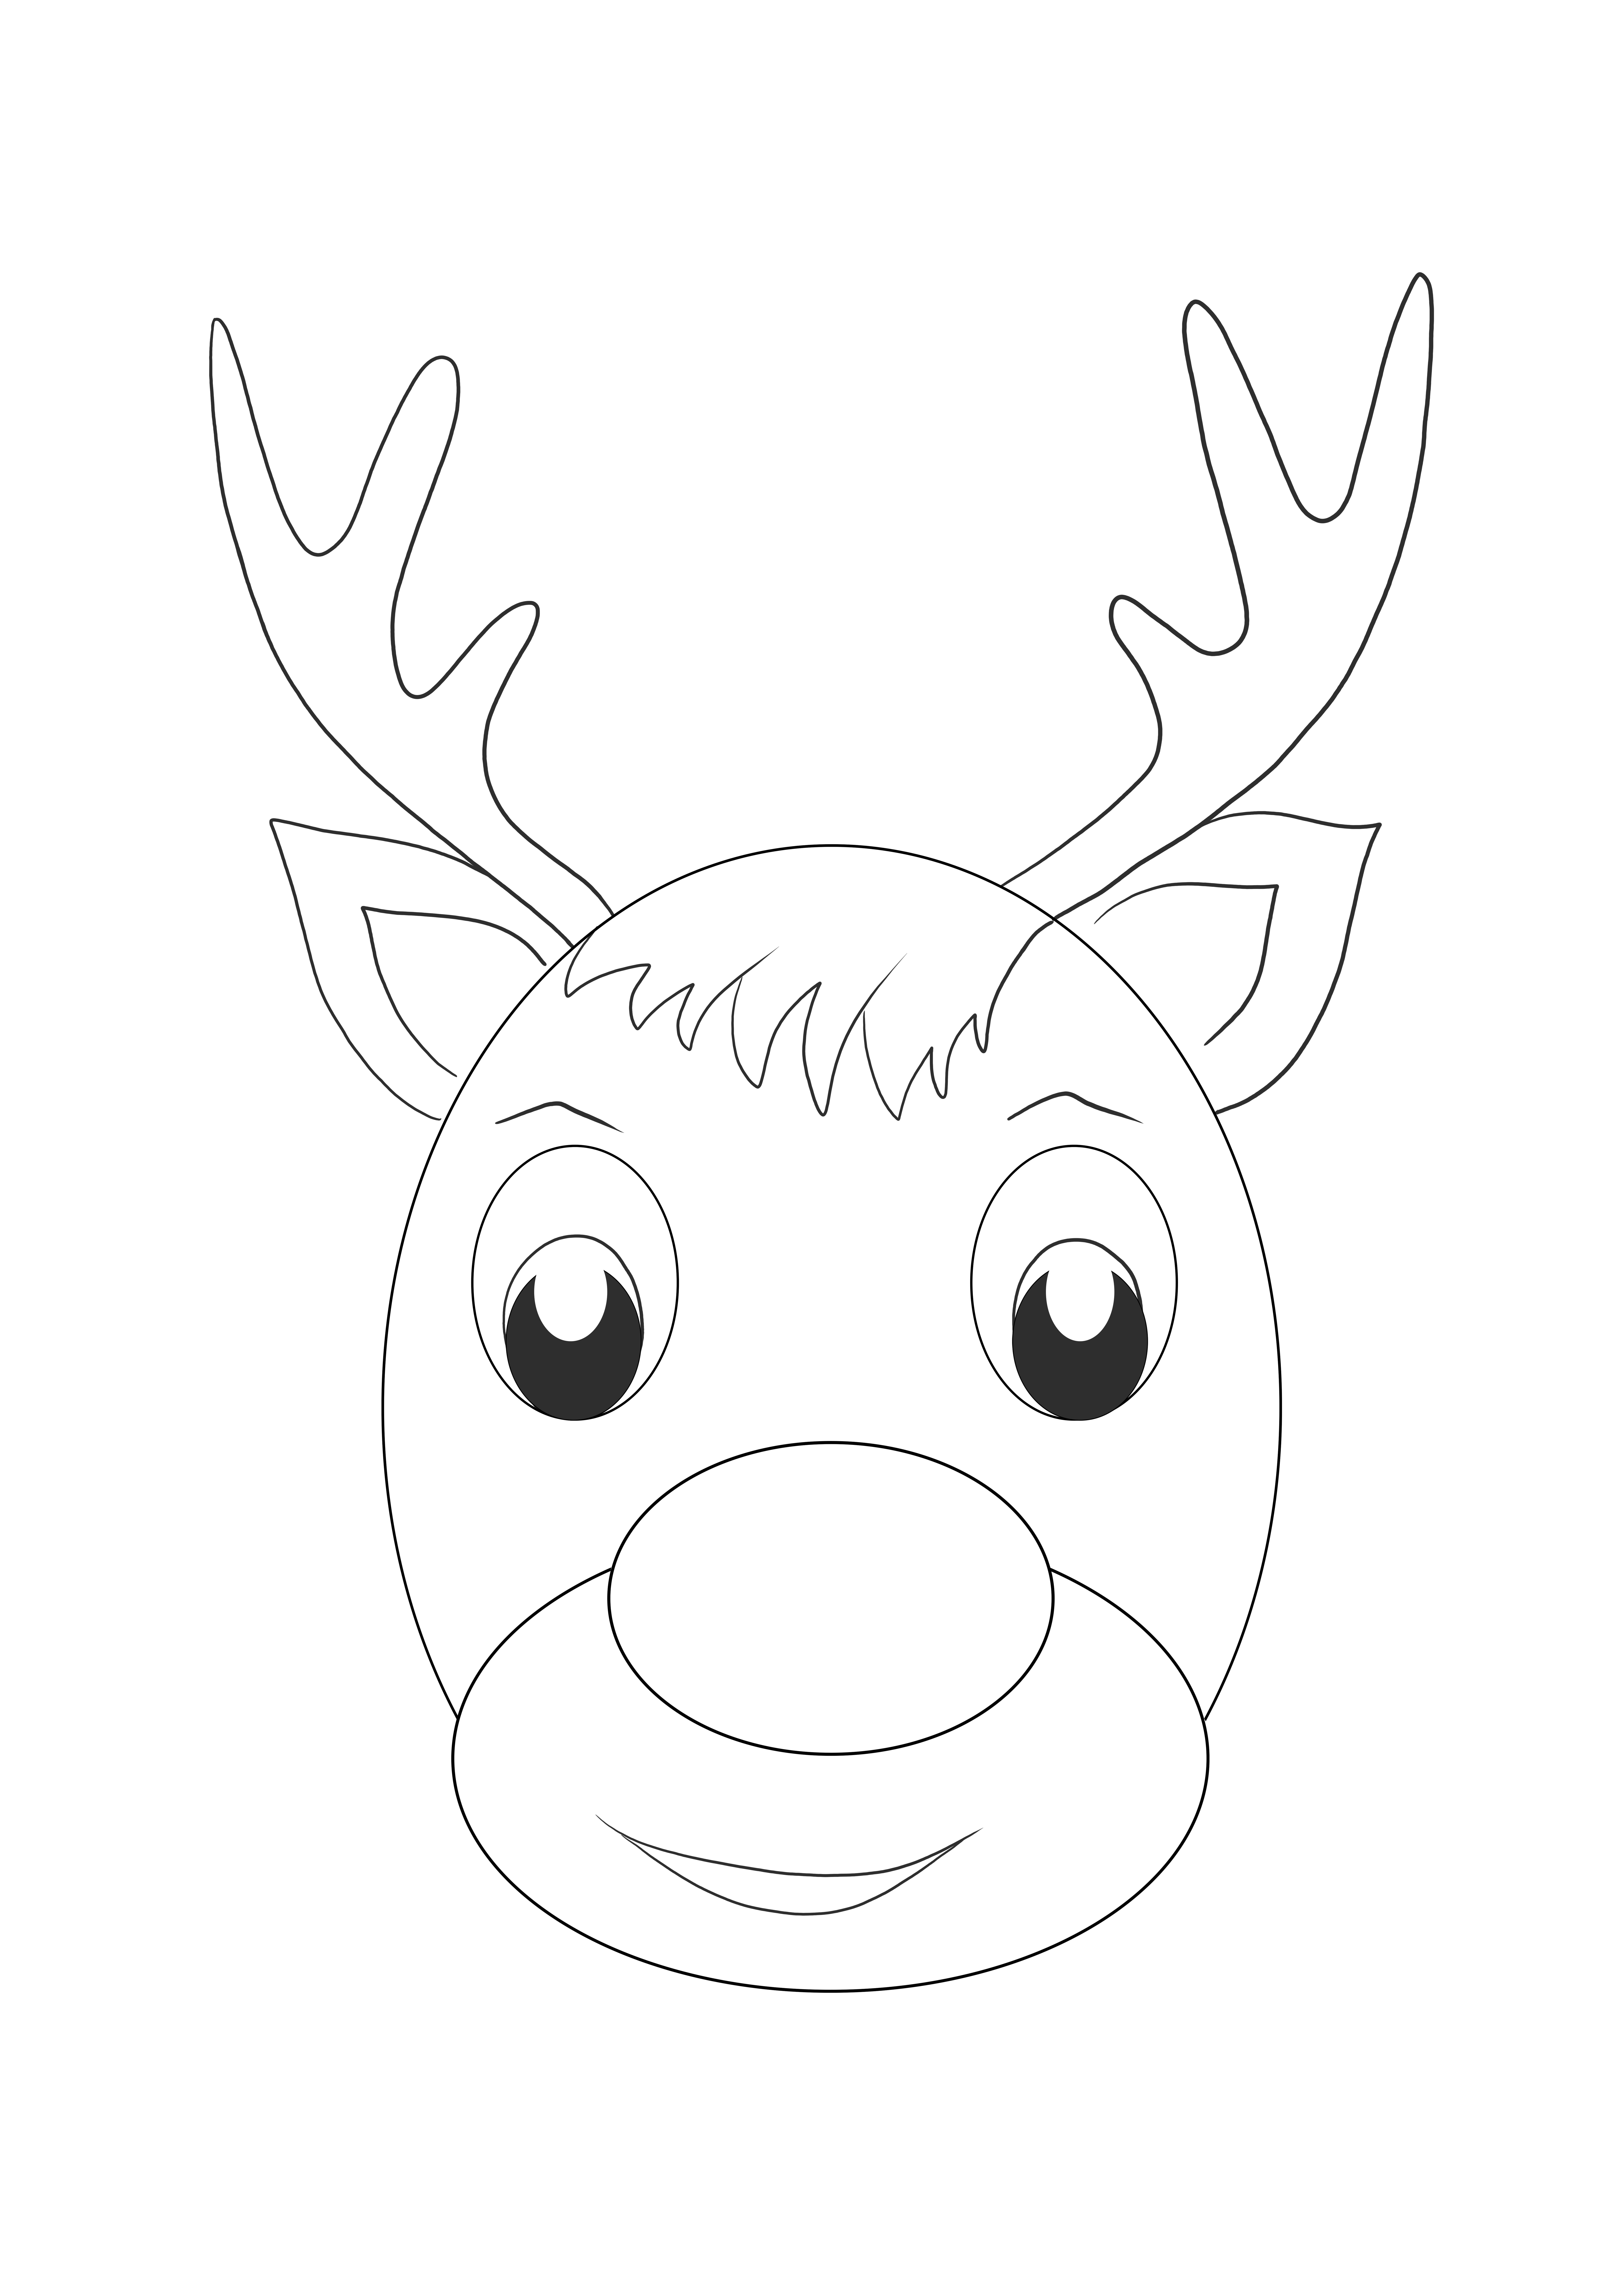 Christmas Reindeer Face to print for free or download coloring image